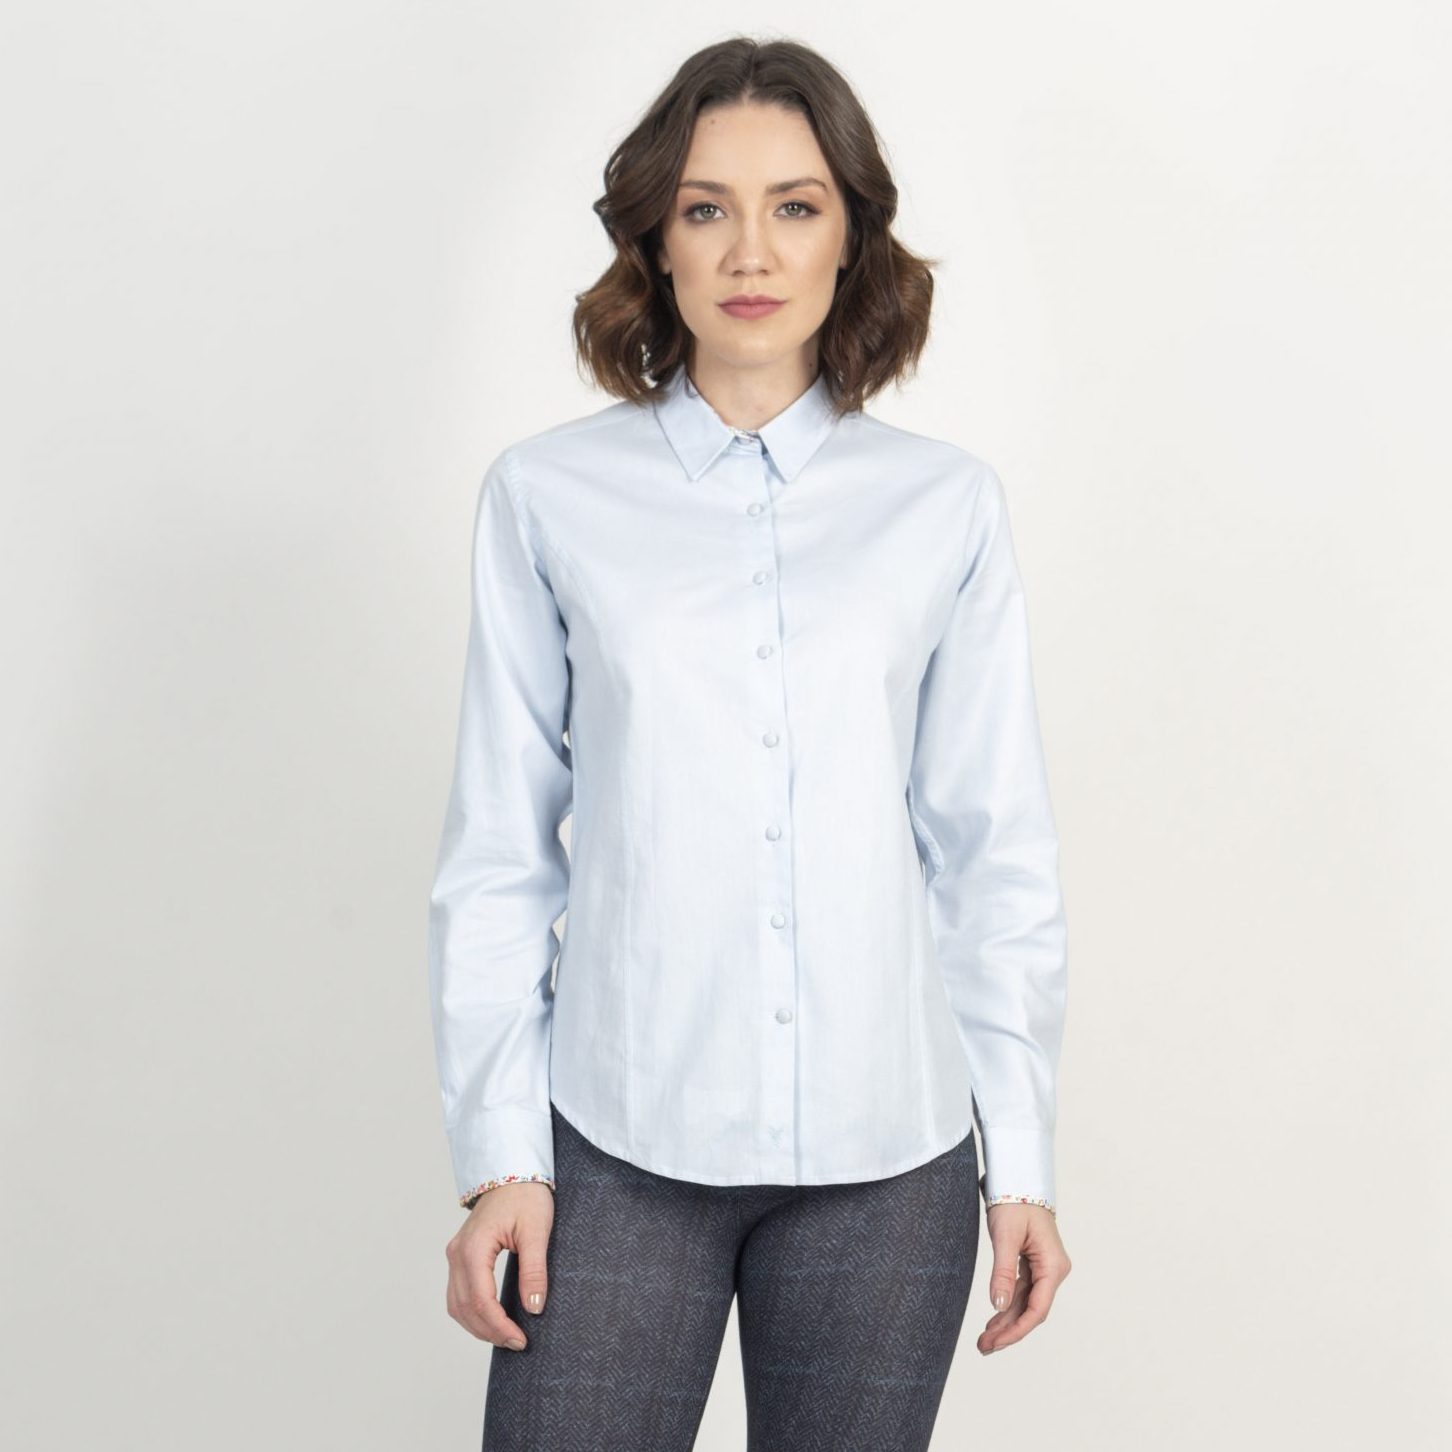 Hartwell Zoe Shirt - Blue - Ruffords Country Store